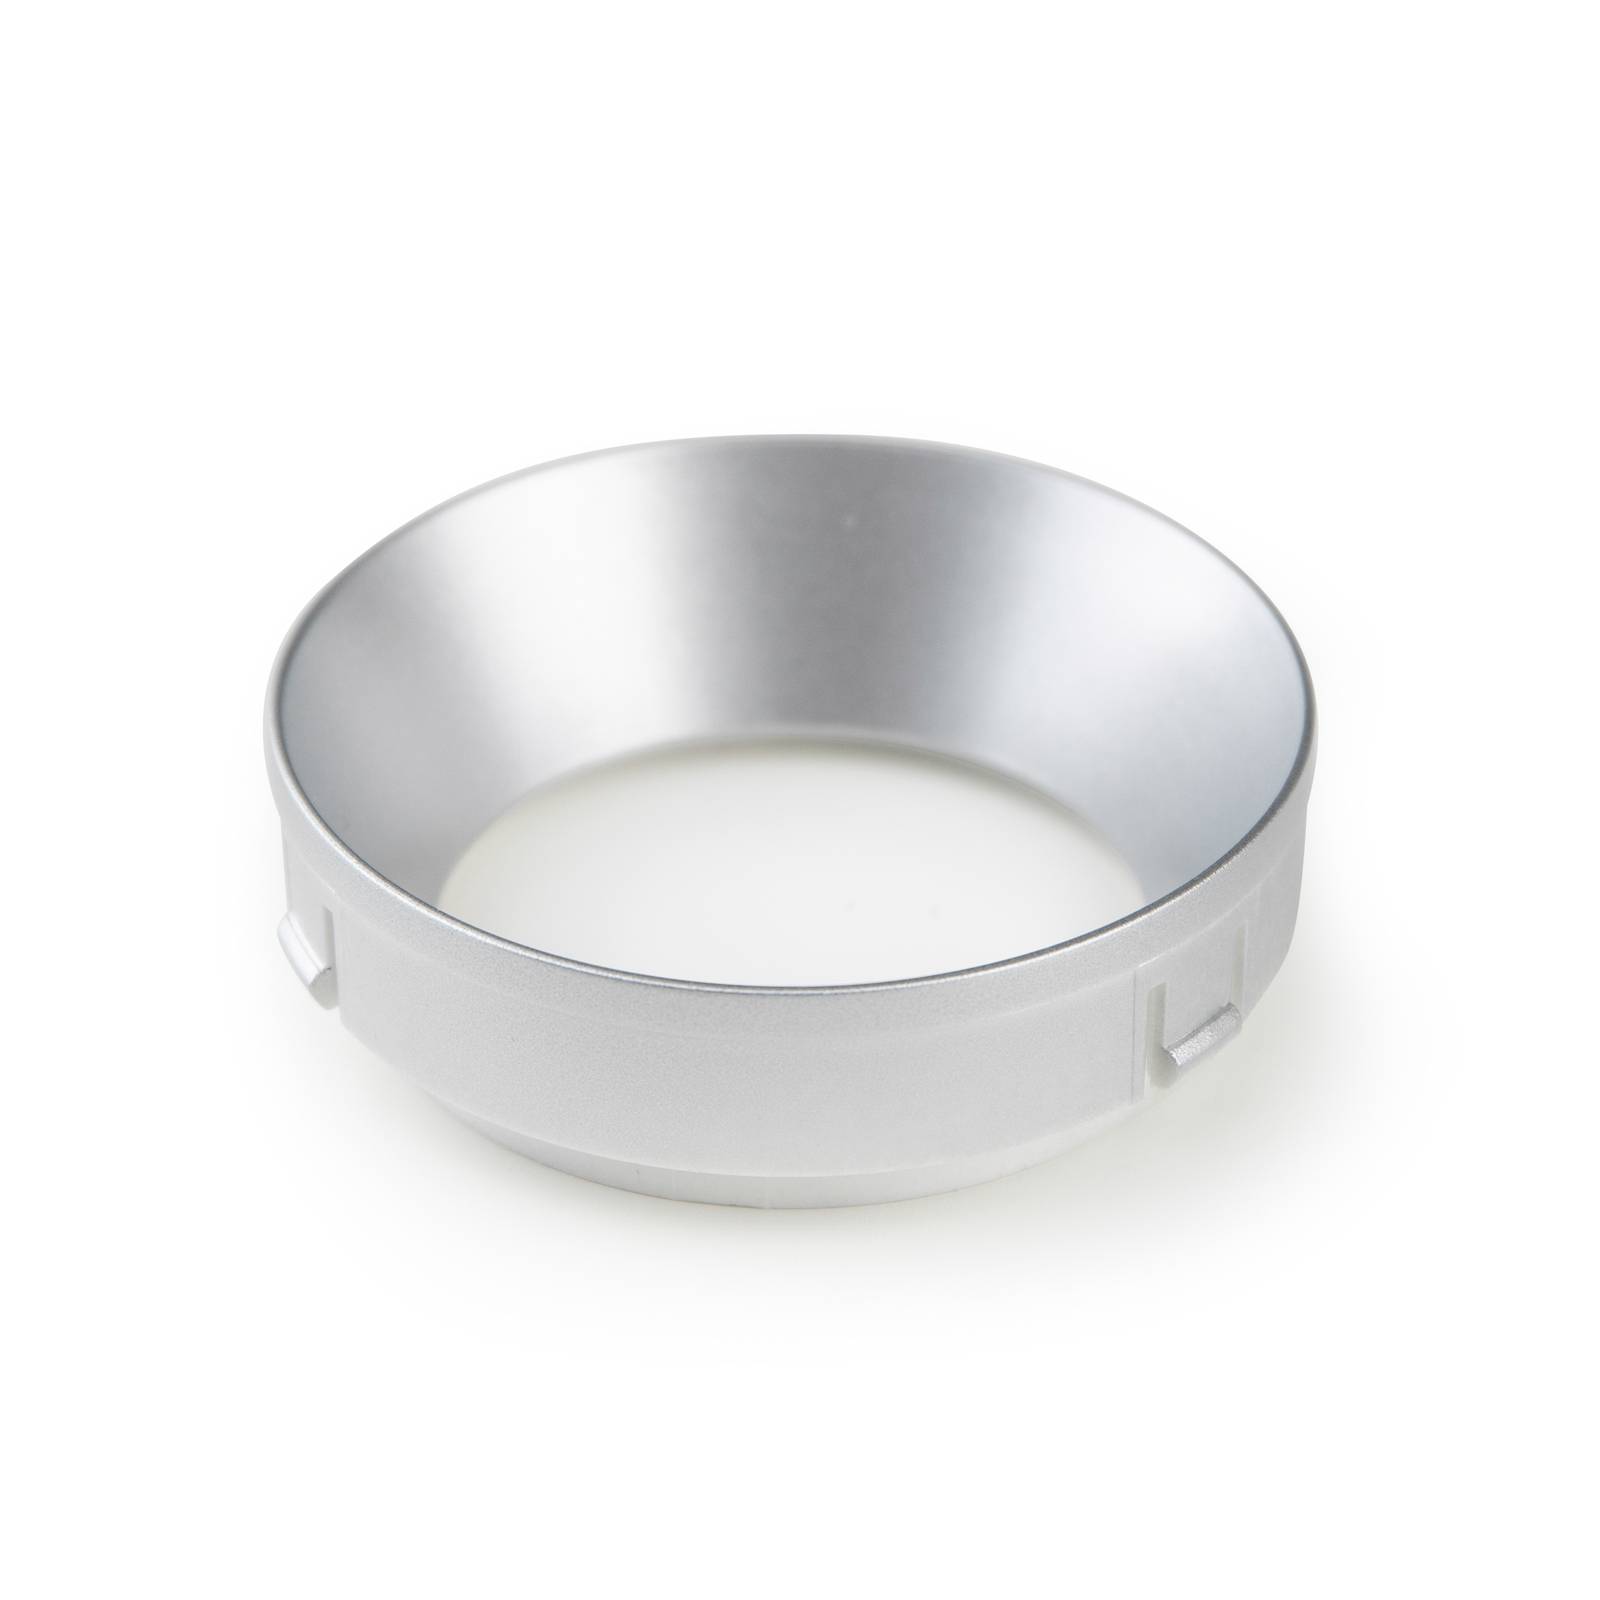 The Light Group SLC Innenring für Downlight Cup, silber